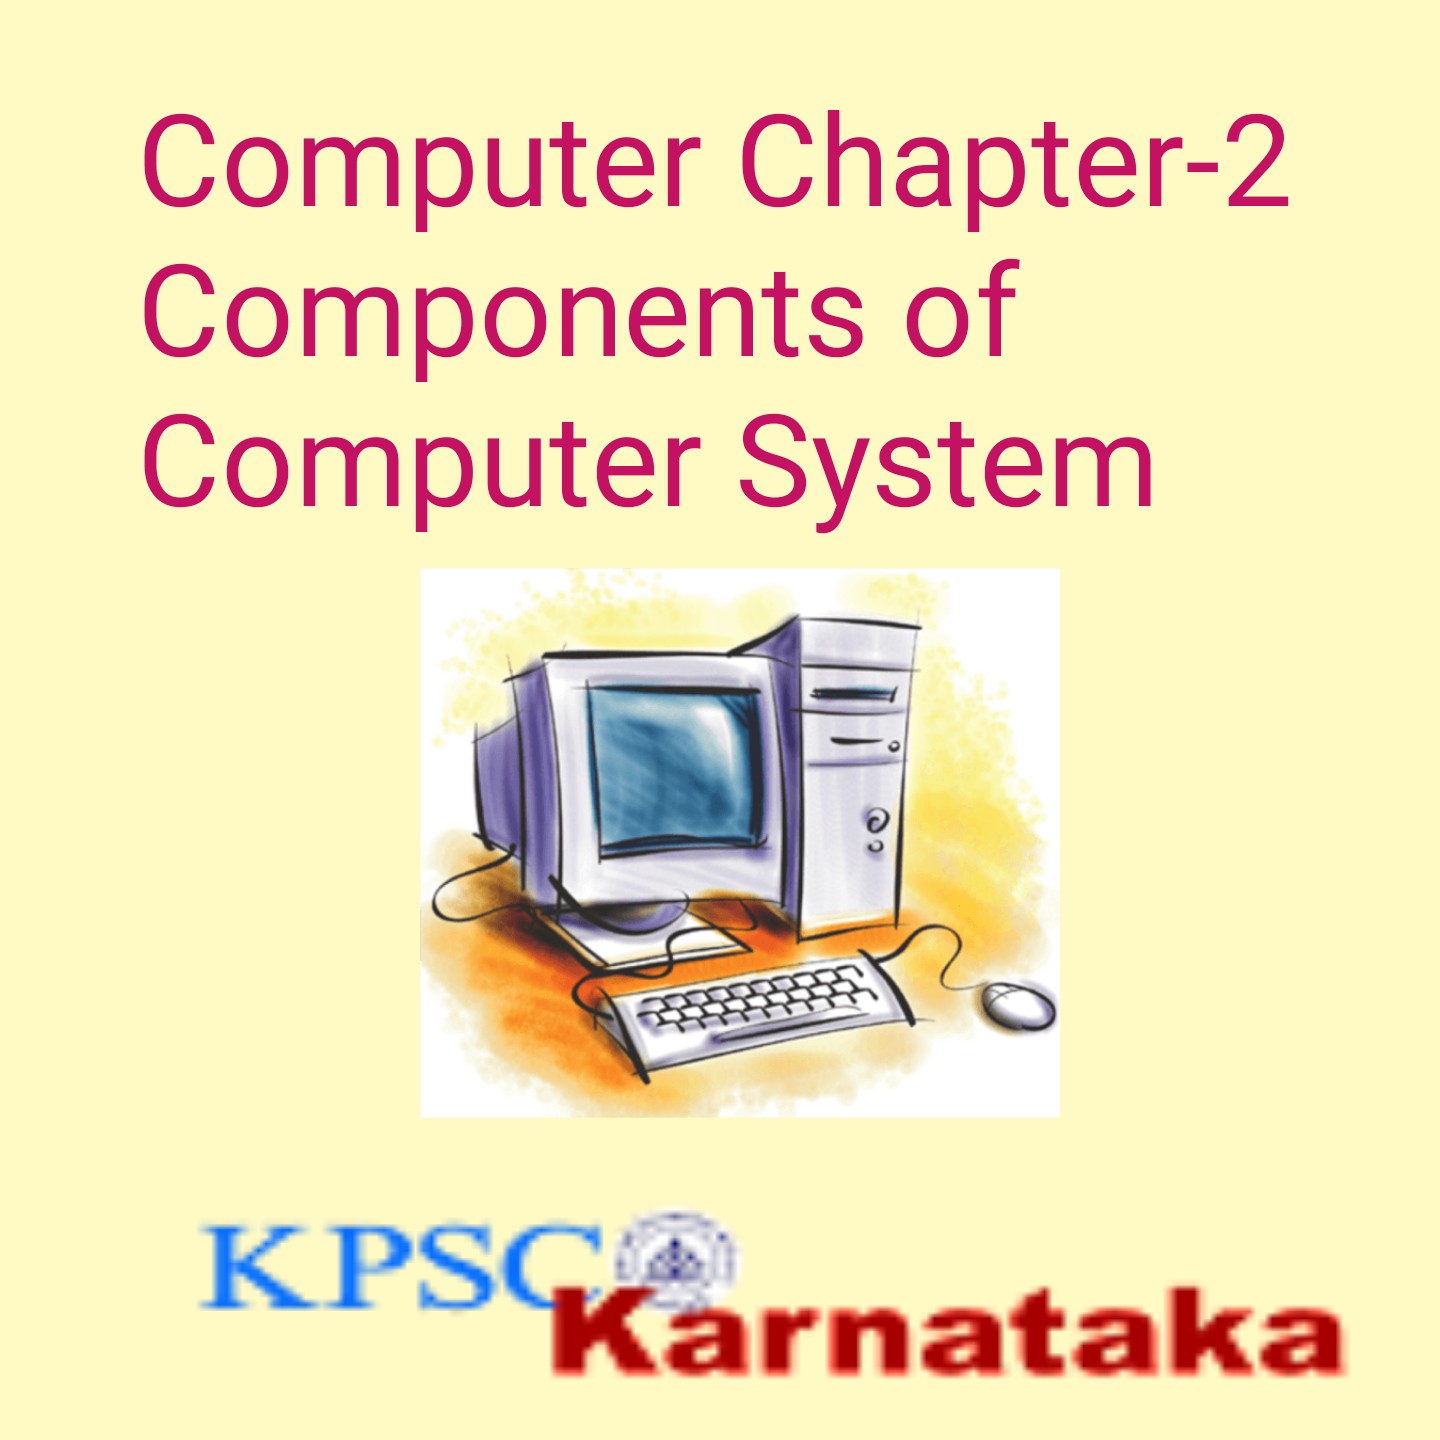 Computer Chapter-2 Components of Computer System